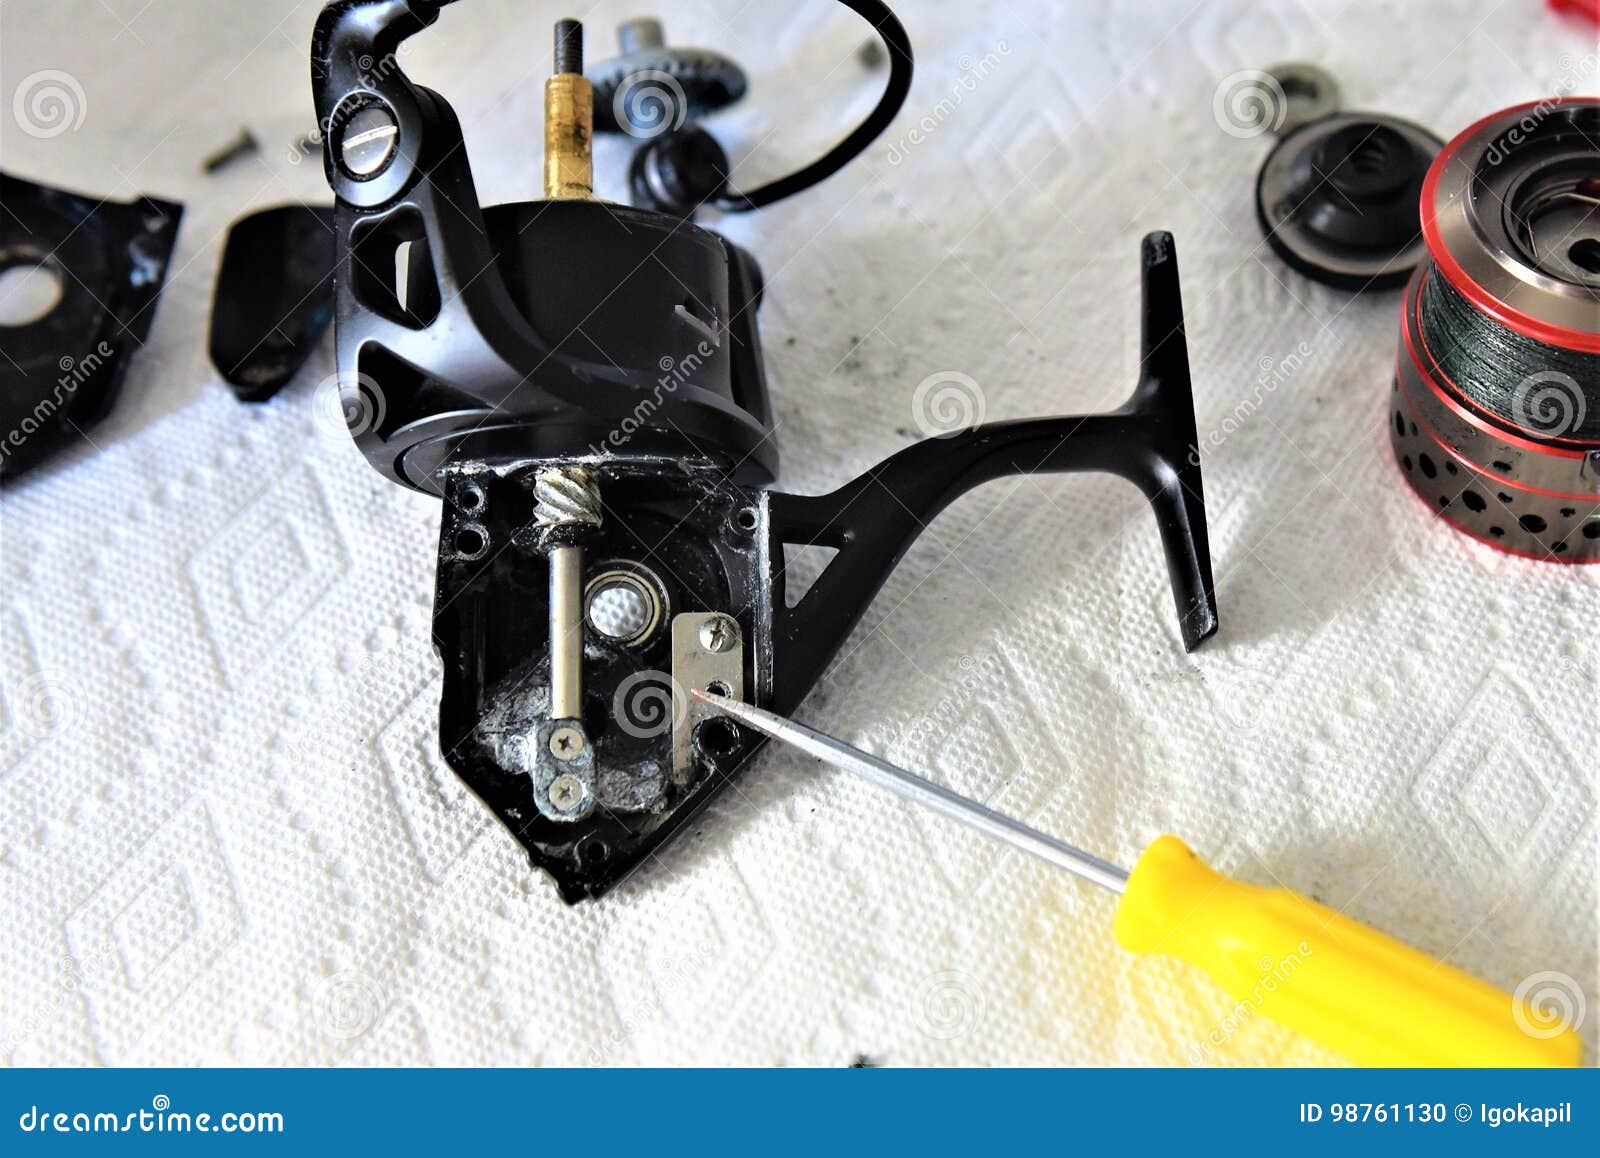 Fishing Reel Disassembled Parts after Cleaning Stock Photo - Image